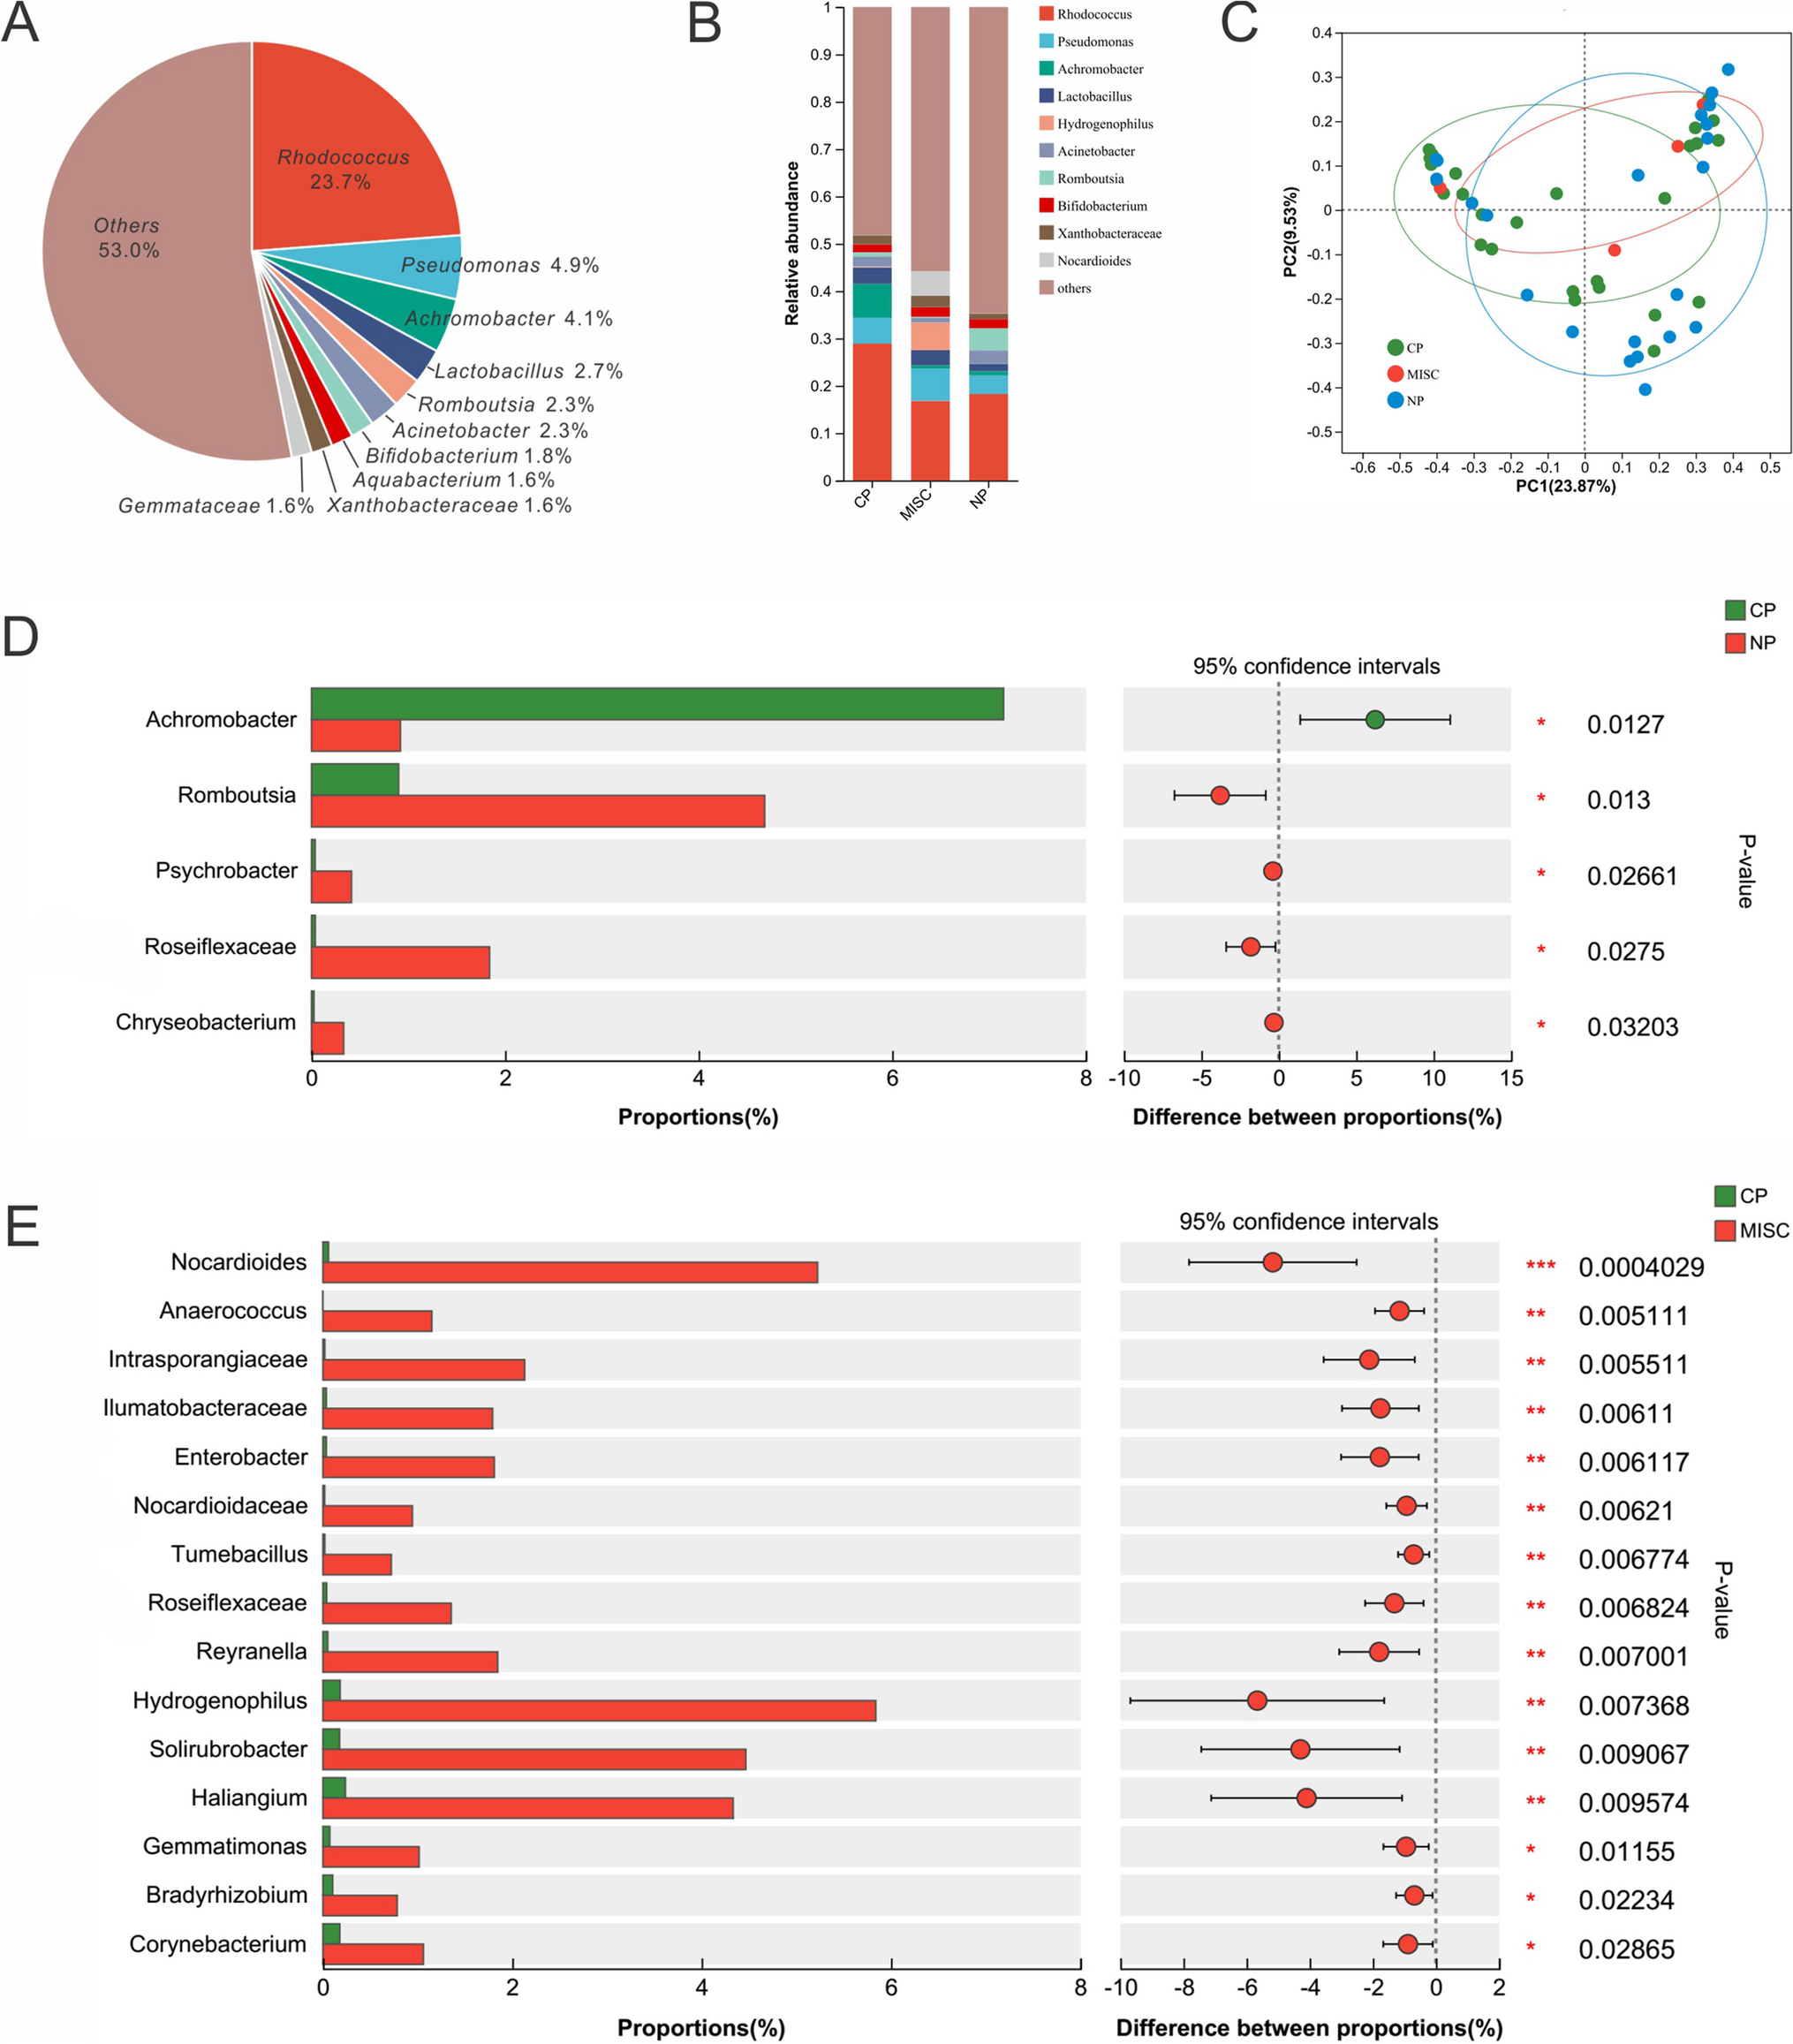 Impact of vaginal microecological differences on pregnancy outcomes and endometrial microbiota in frozen embryo transfer cycles